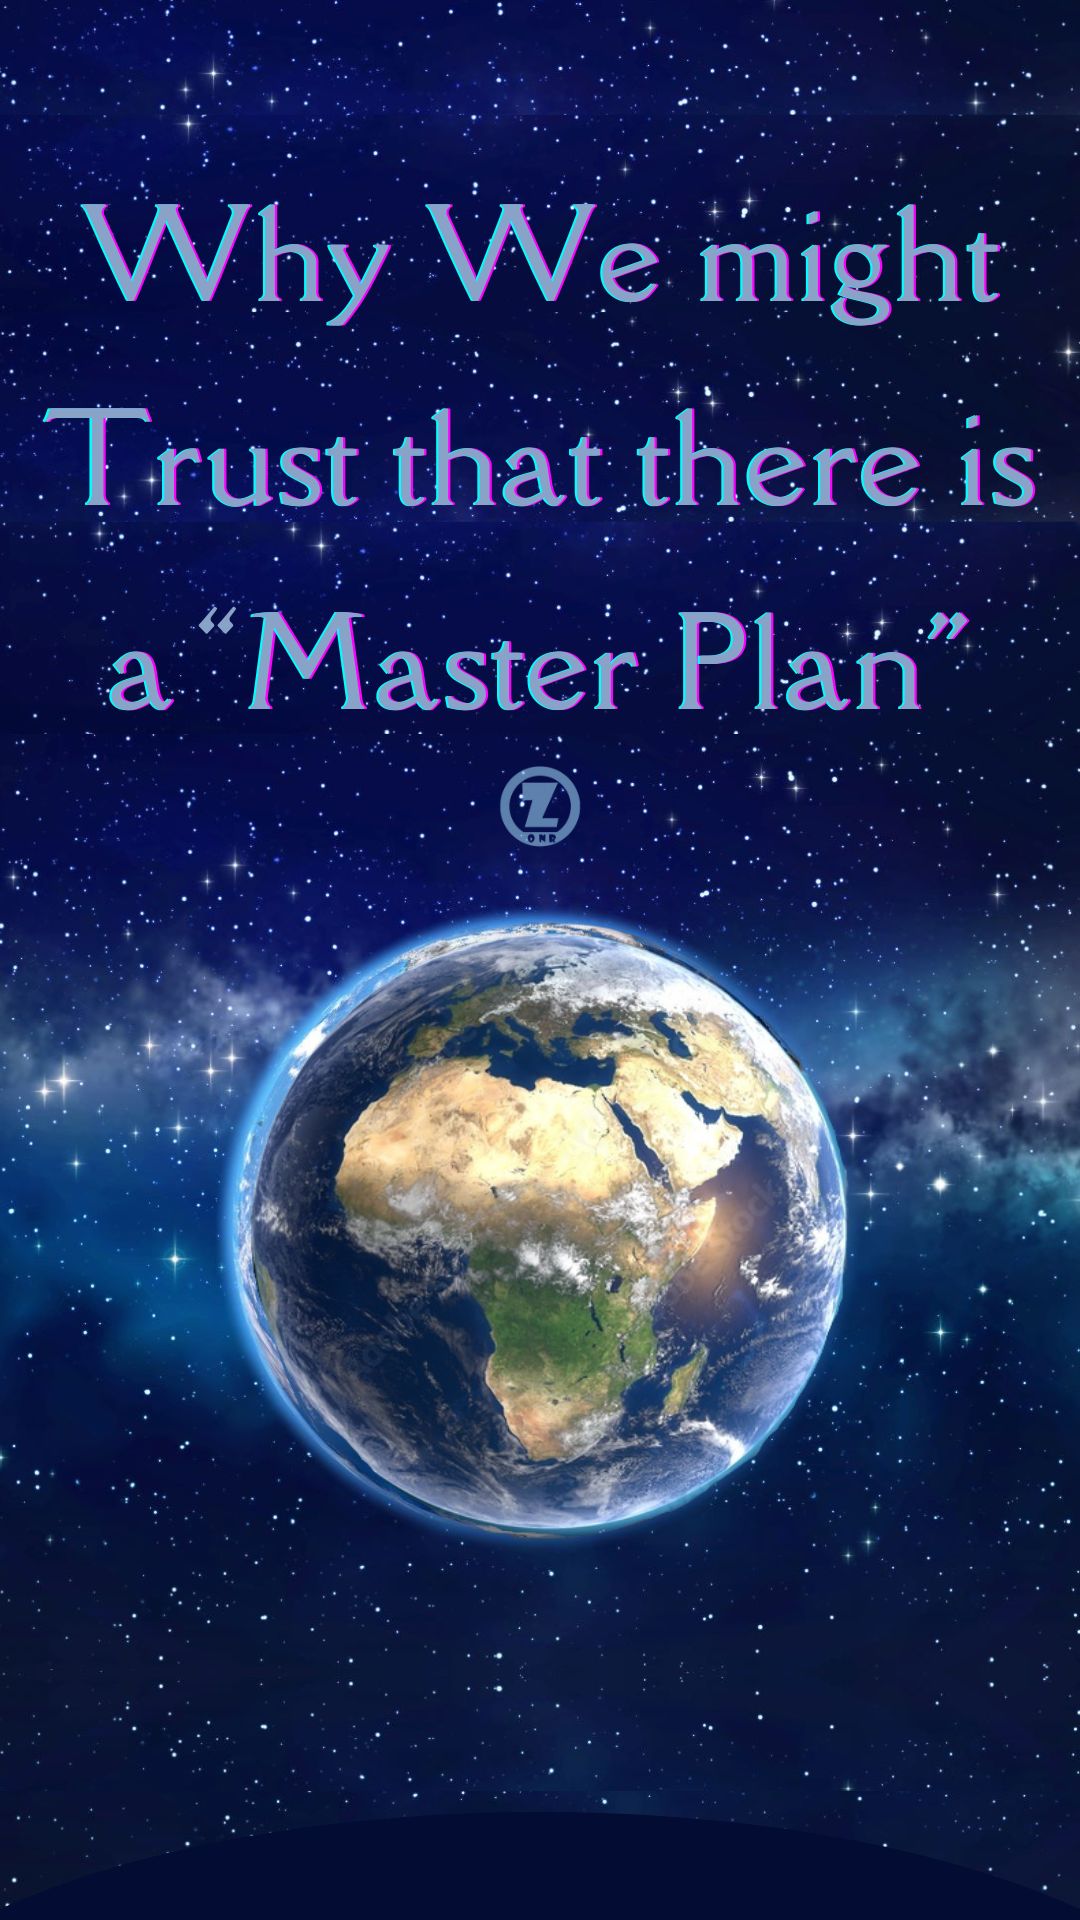 Why We might Trust that there is a “Master Plan” – Step 1